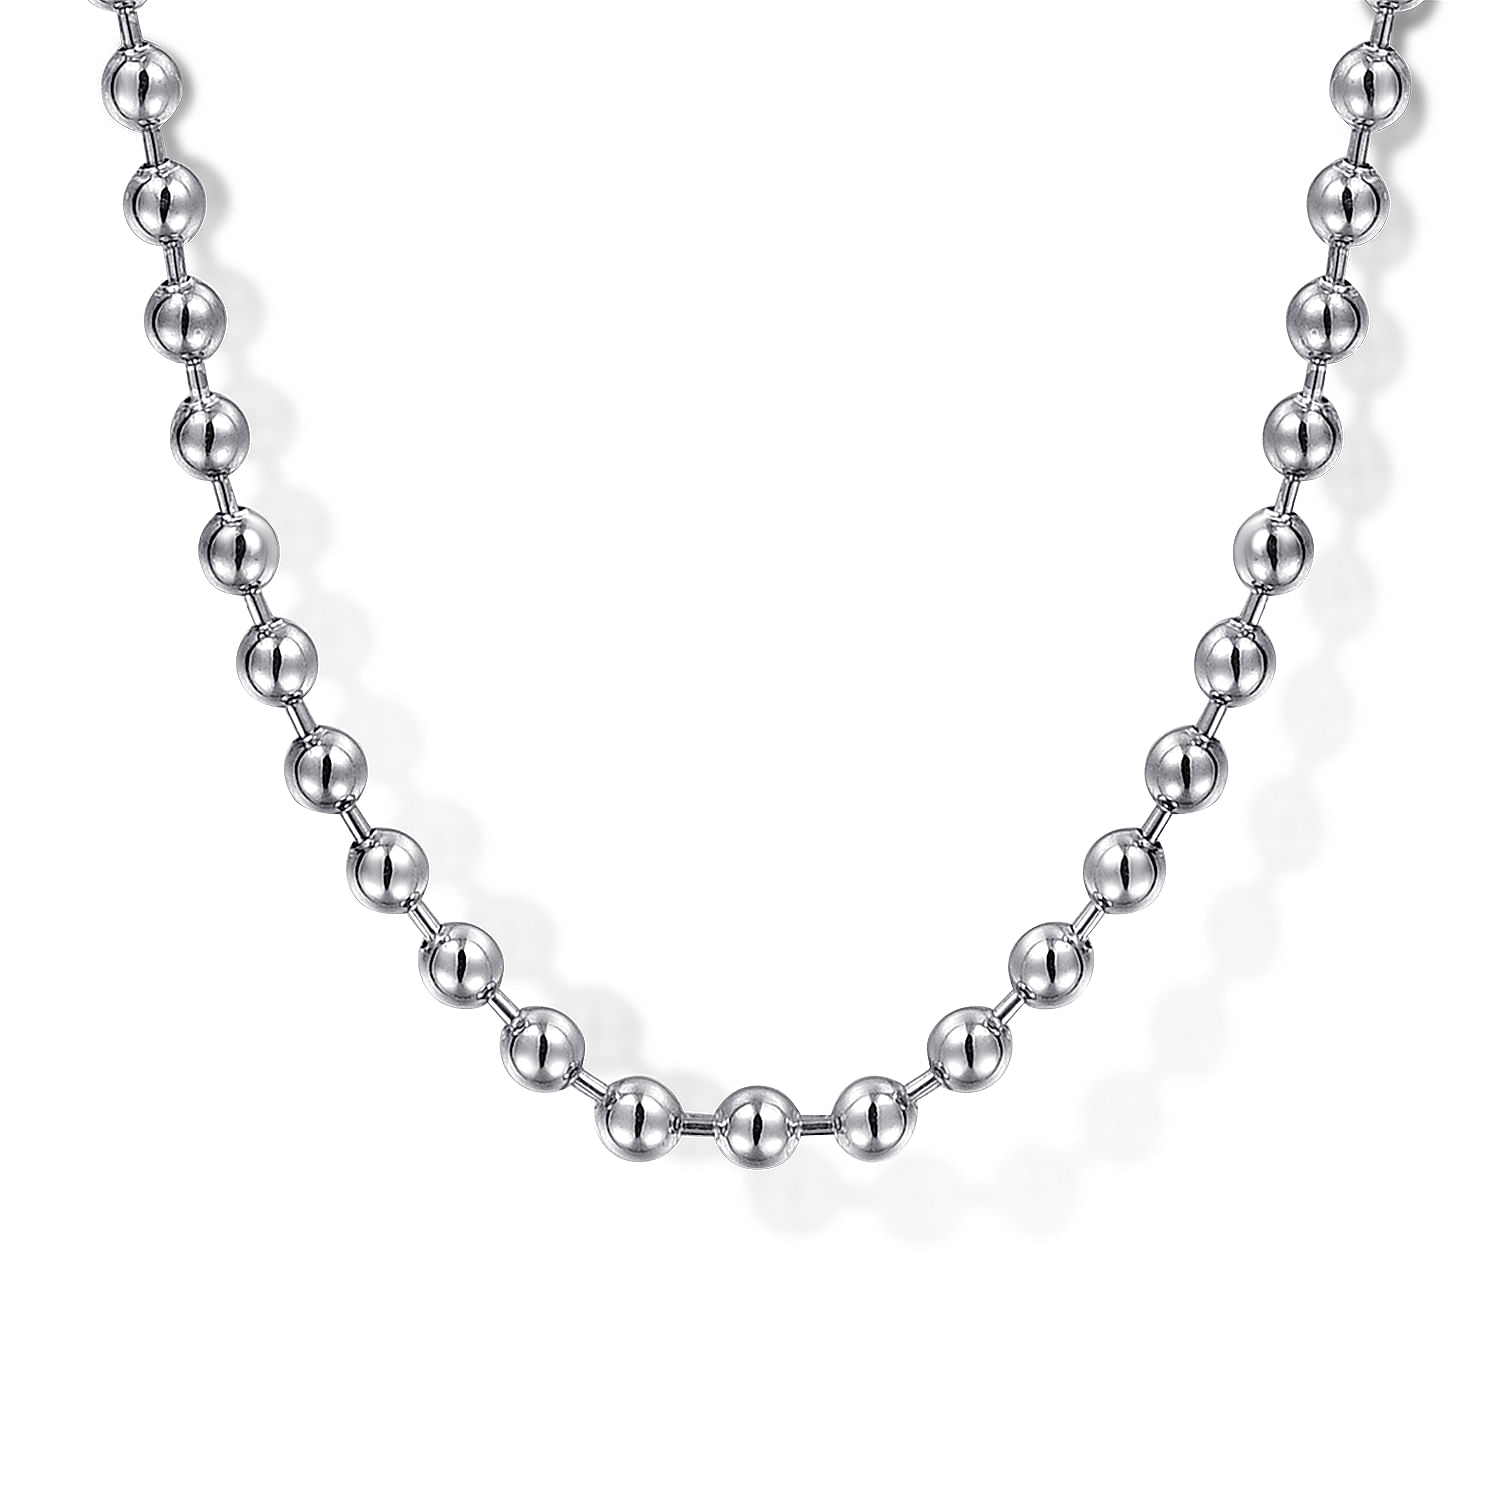 24 Inch 925 Sterling Silver 3mm Ball Hollow Chain Necklace